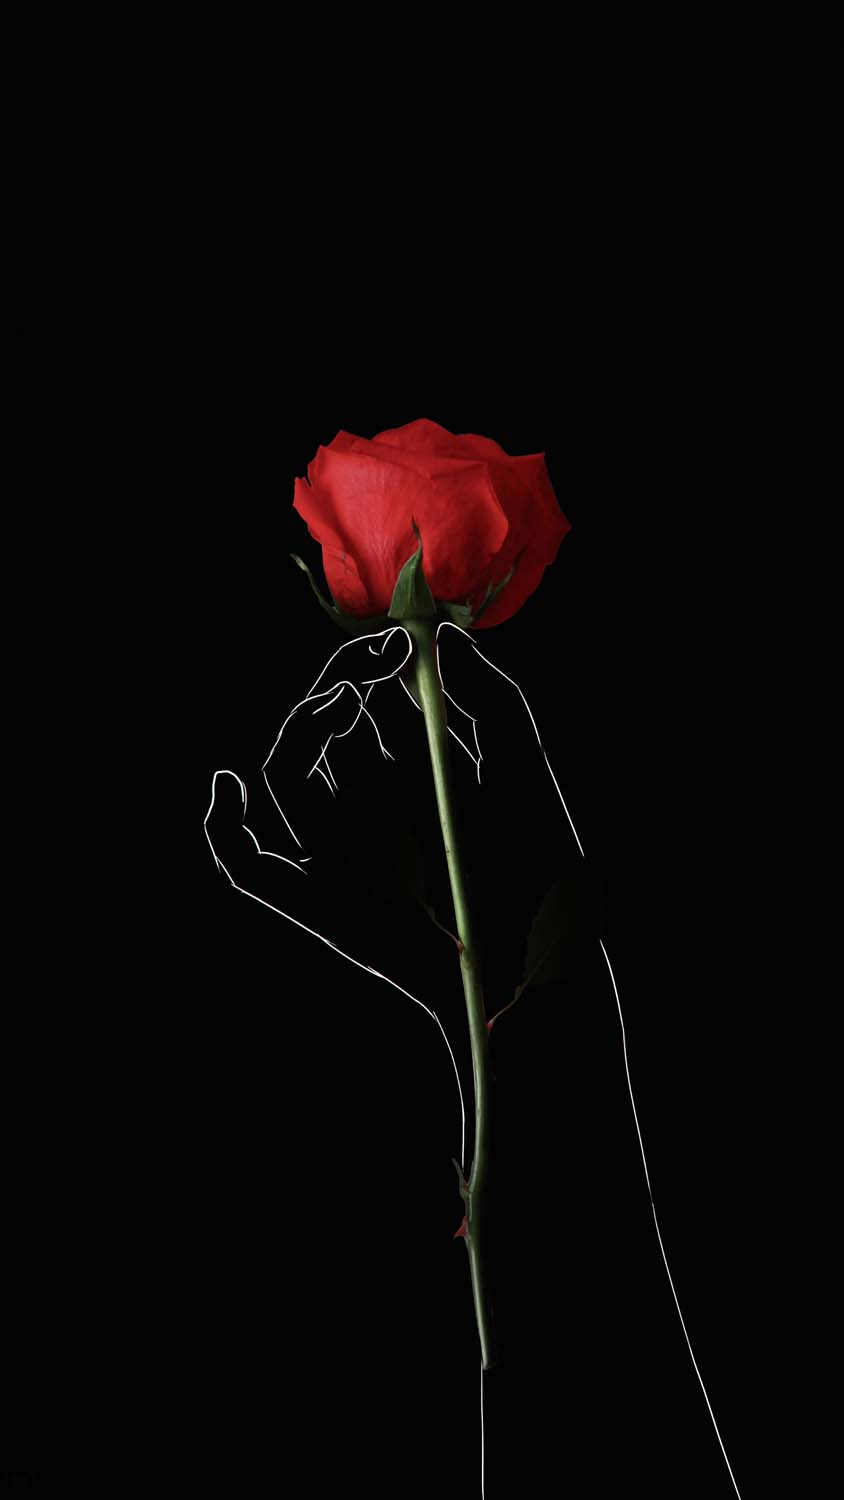 Red Rose IPhone Wallpaper HD  IPhone Wallpapers